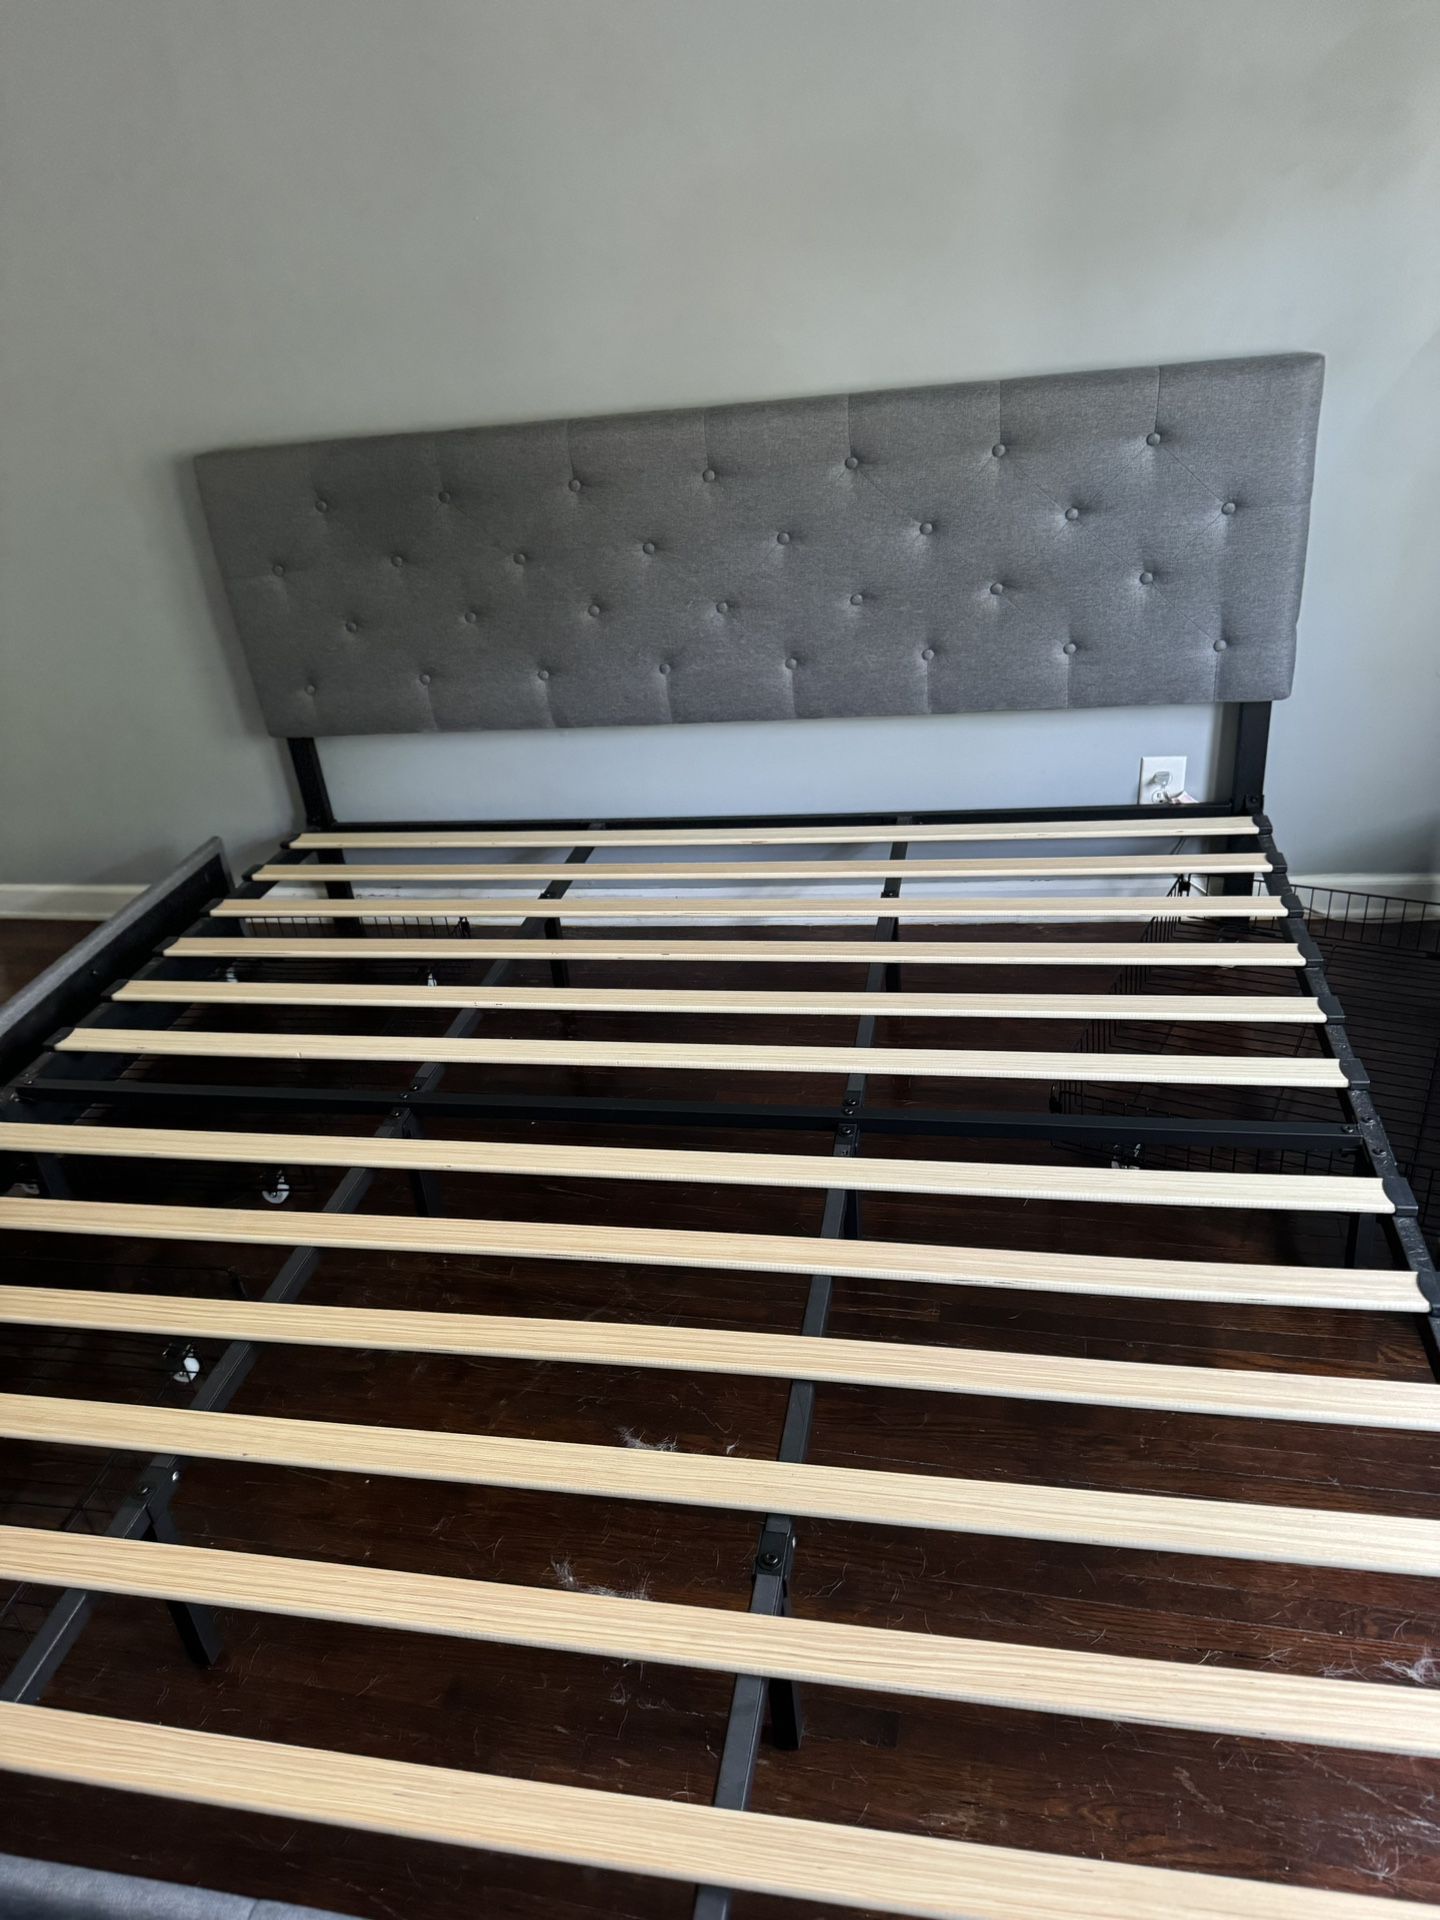 King Bed Frame With Drawers! 